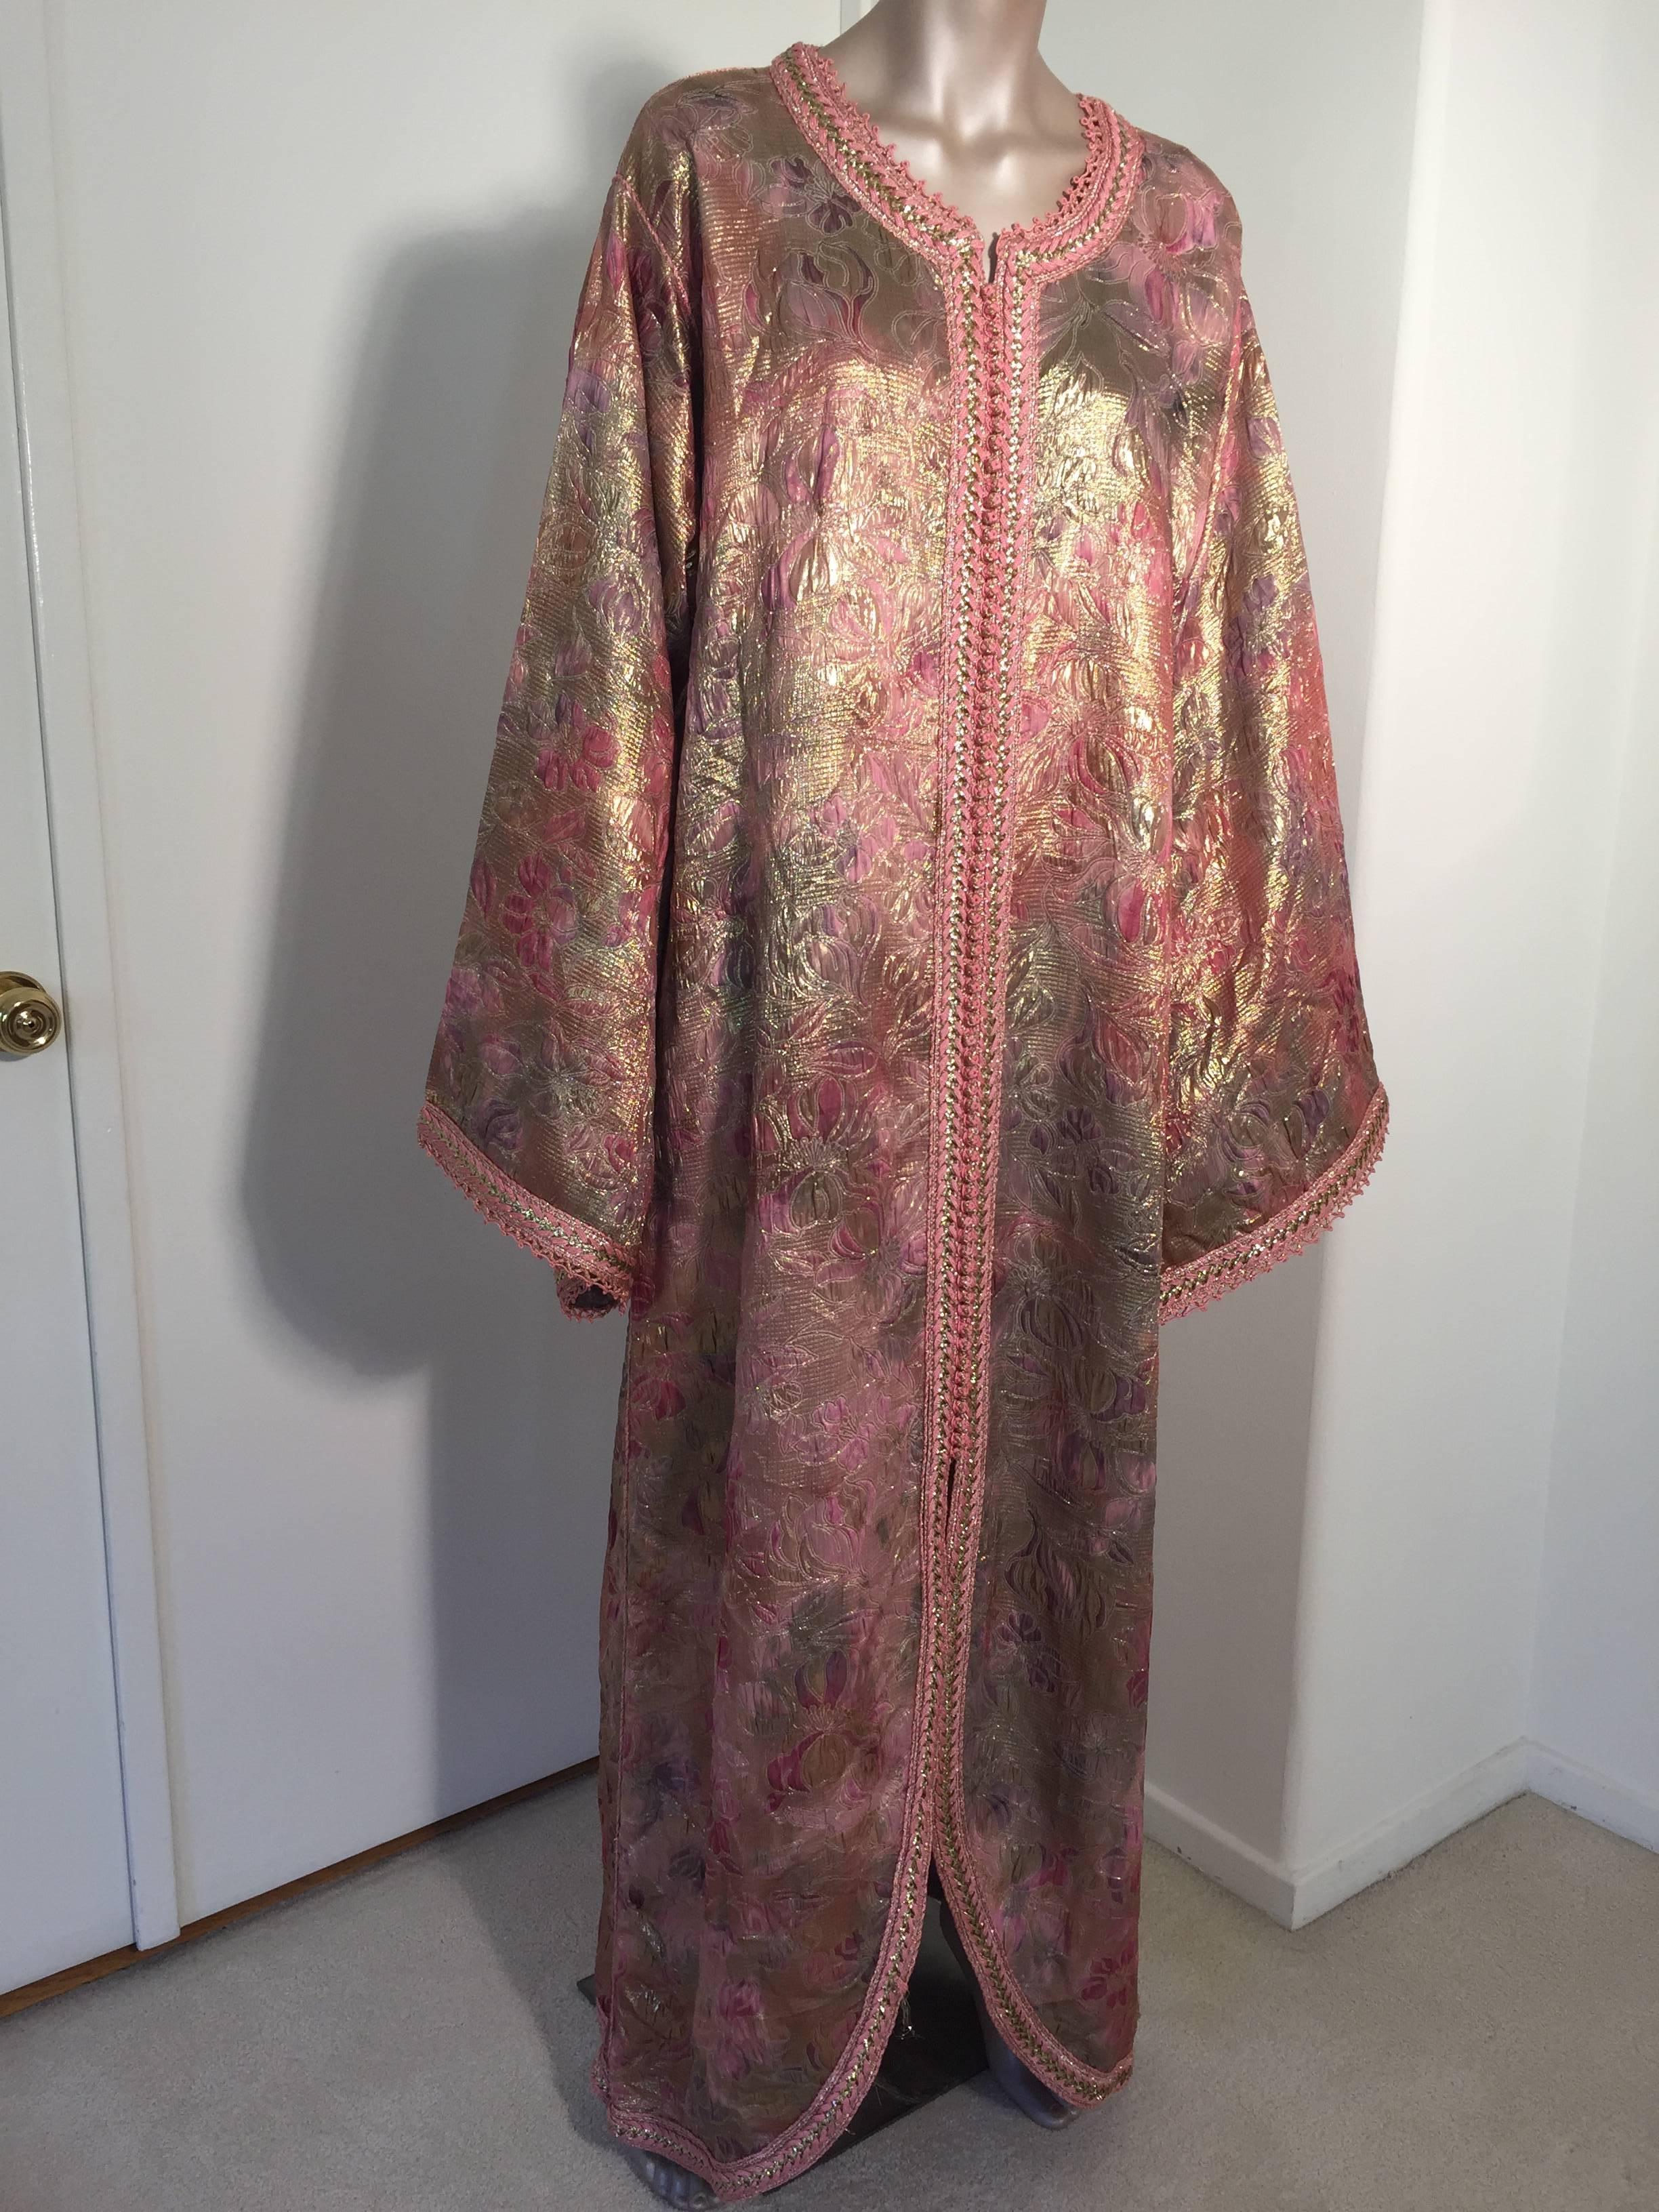 Elegant Moroccan pink lame caftan.
One of a kind evening Moroccan Middle Eastern gown, you could wear it closed or open like a coat.
The kaftan features a traditional neckline, with side slits and gently fluted embellished sleeves. It closes at the